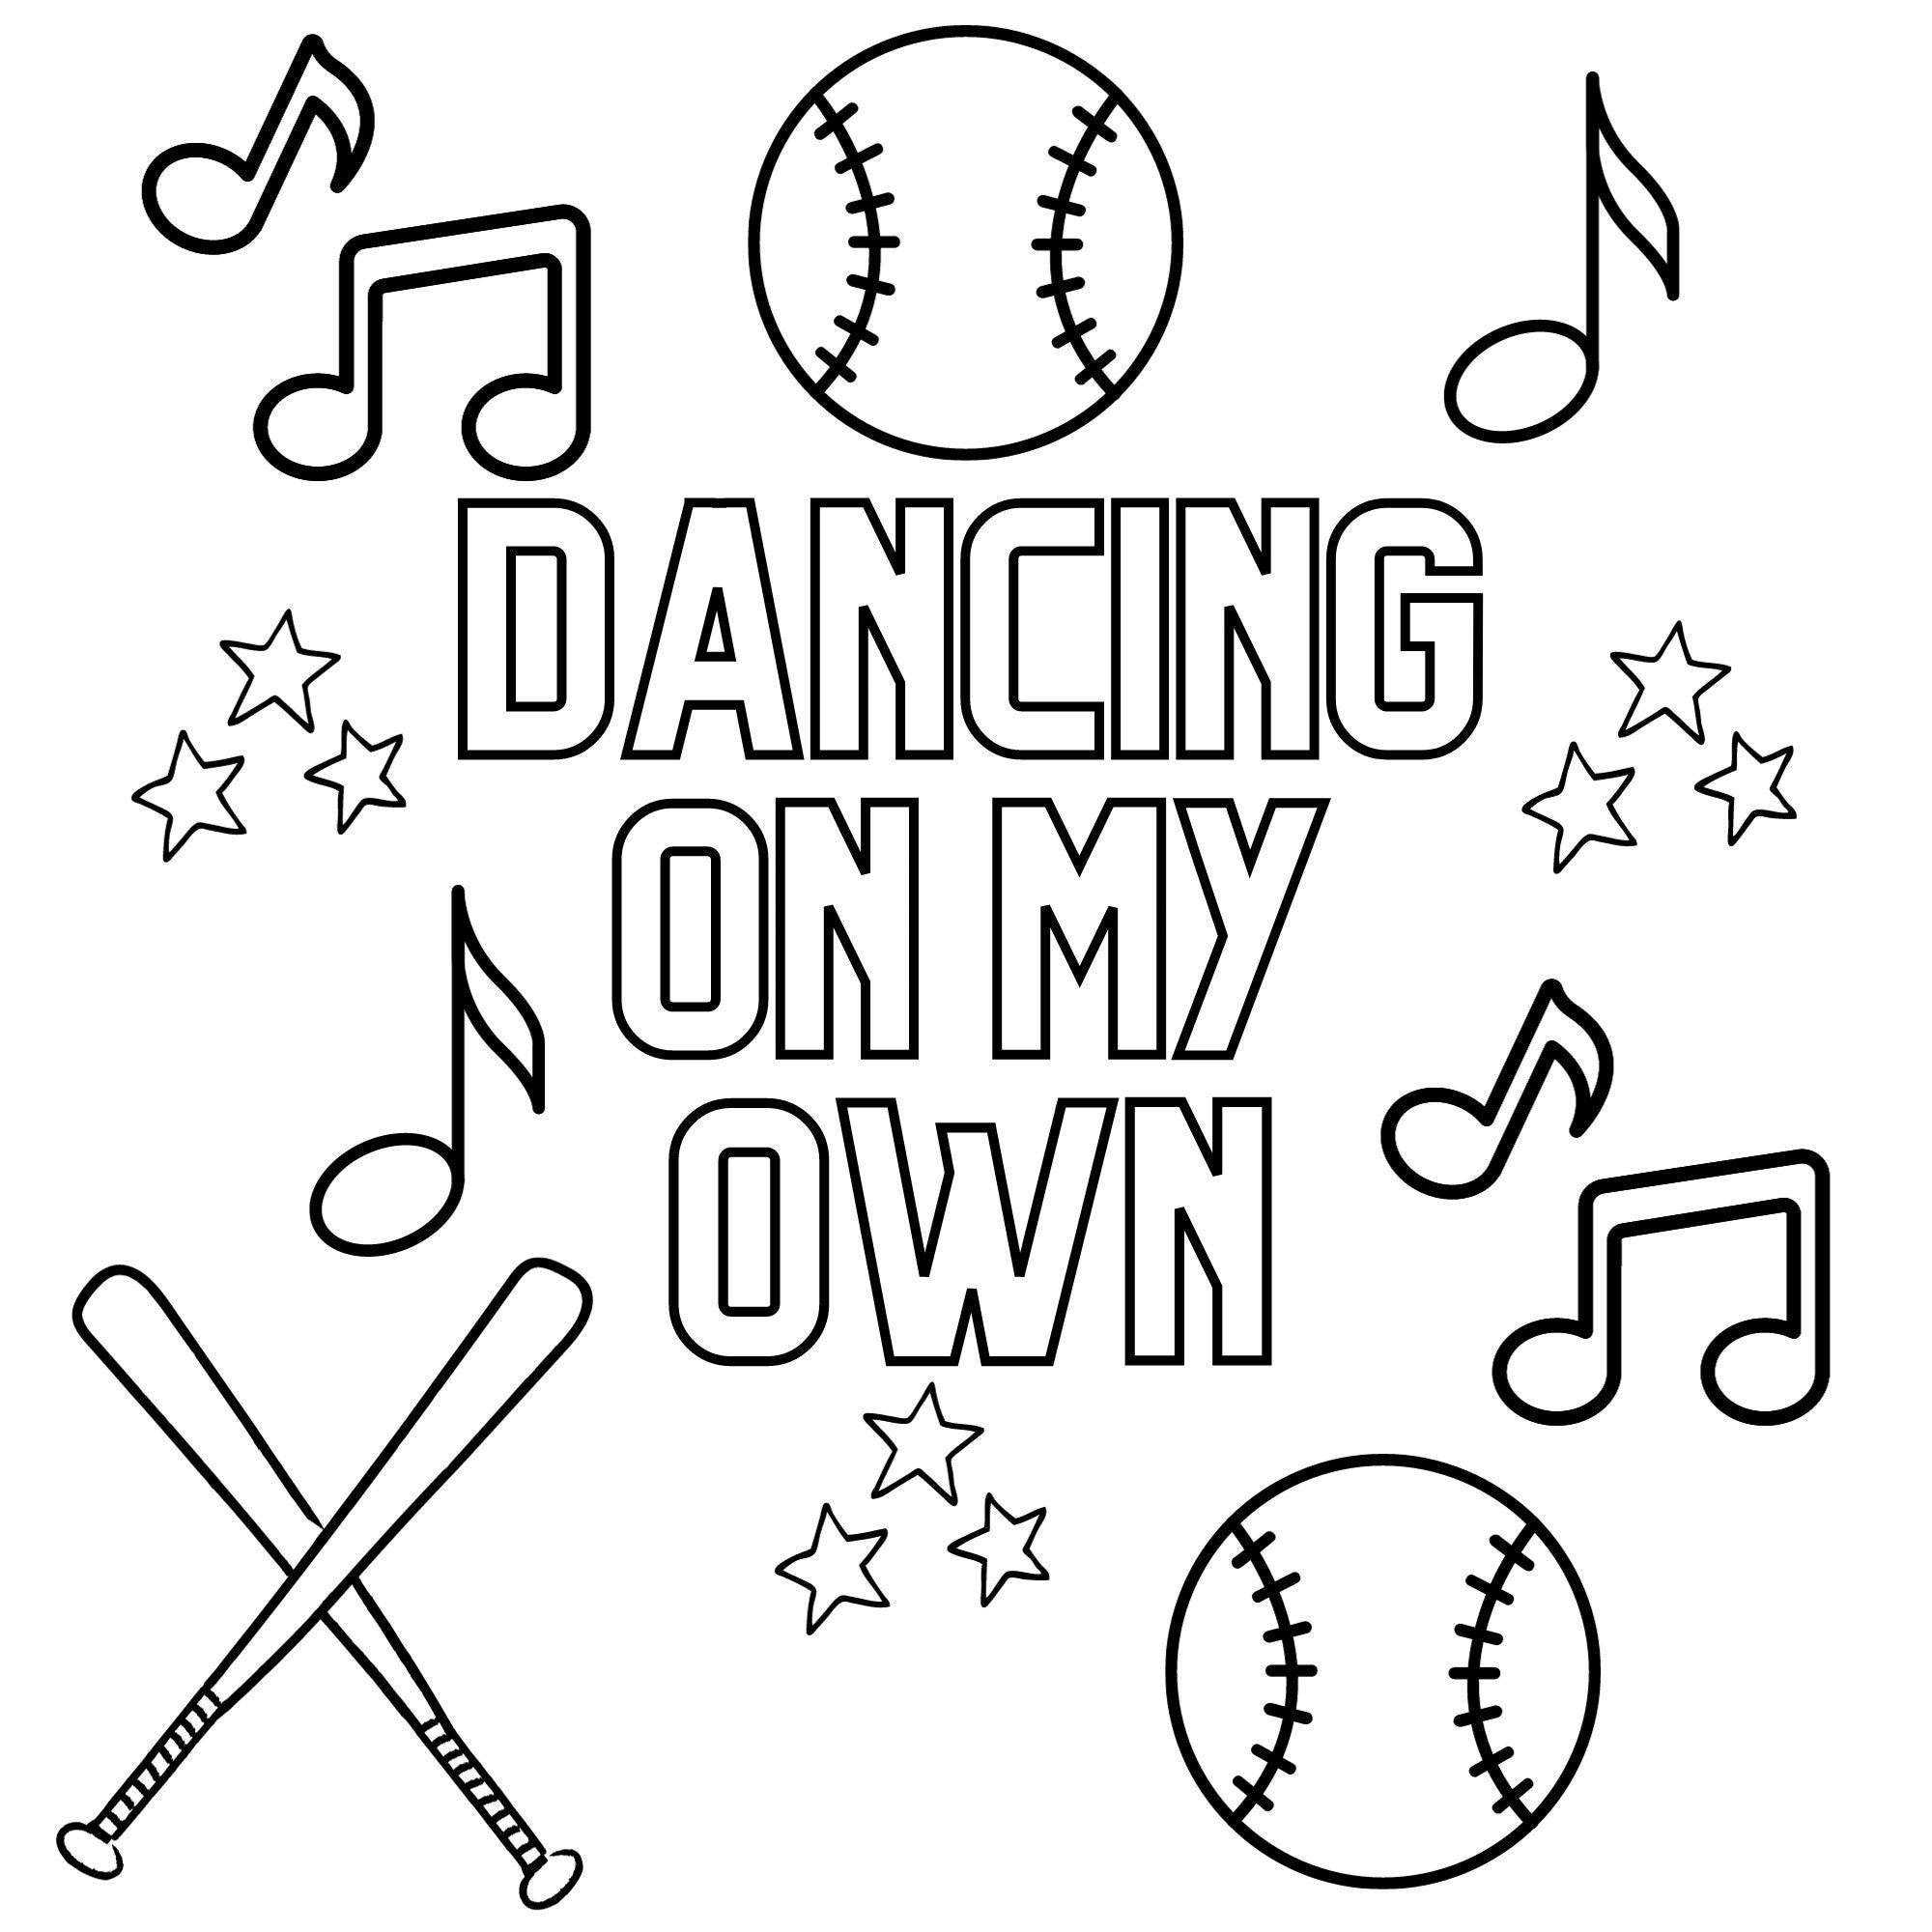 Dancing on my own phillies kids printable coloring page instant download